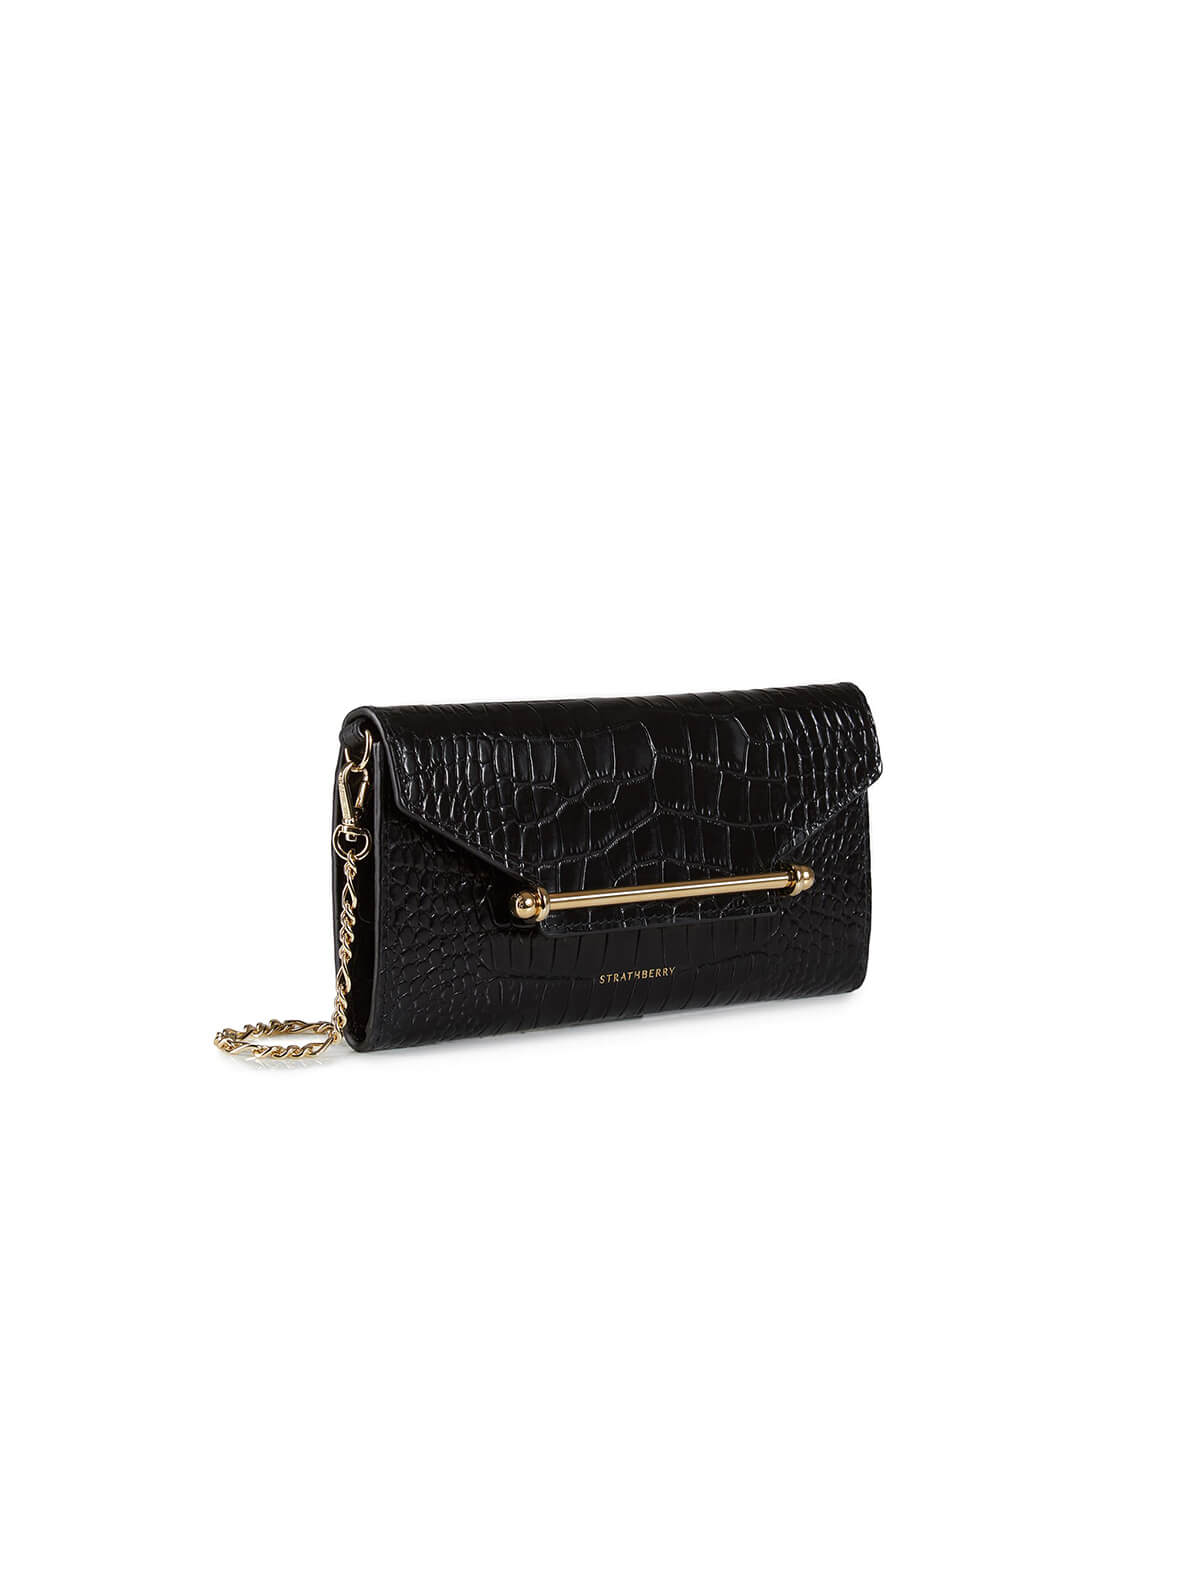 STRATHBERRY Multrees Wallet on Chain in Embossed Croc Black | CLOSET ...